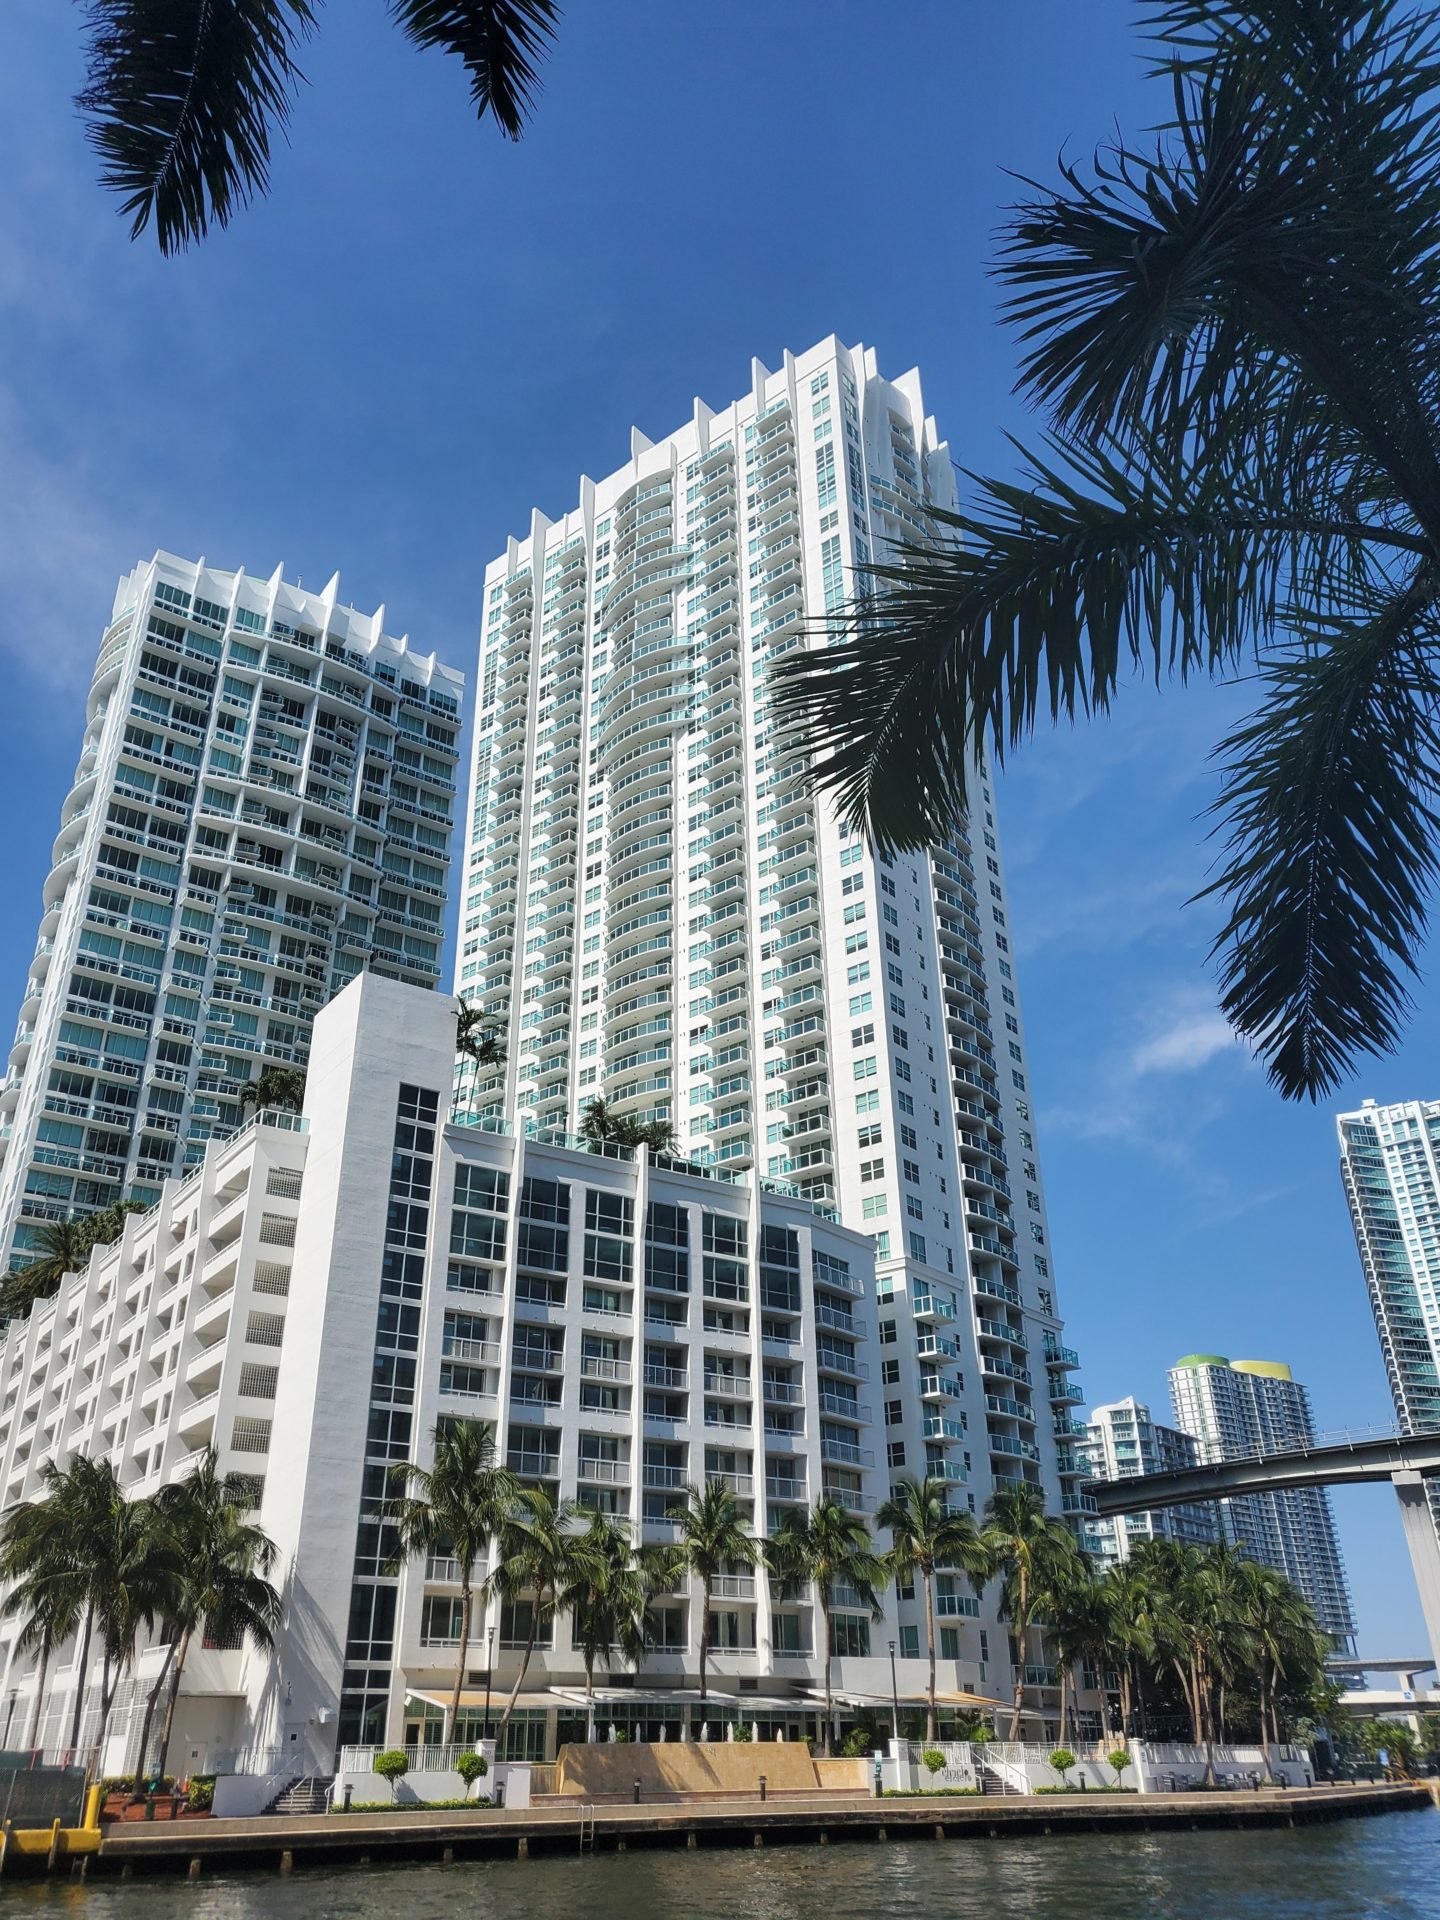 a group of tall buildings with palm trees